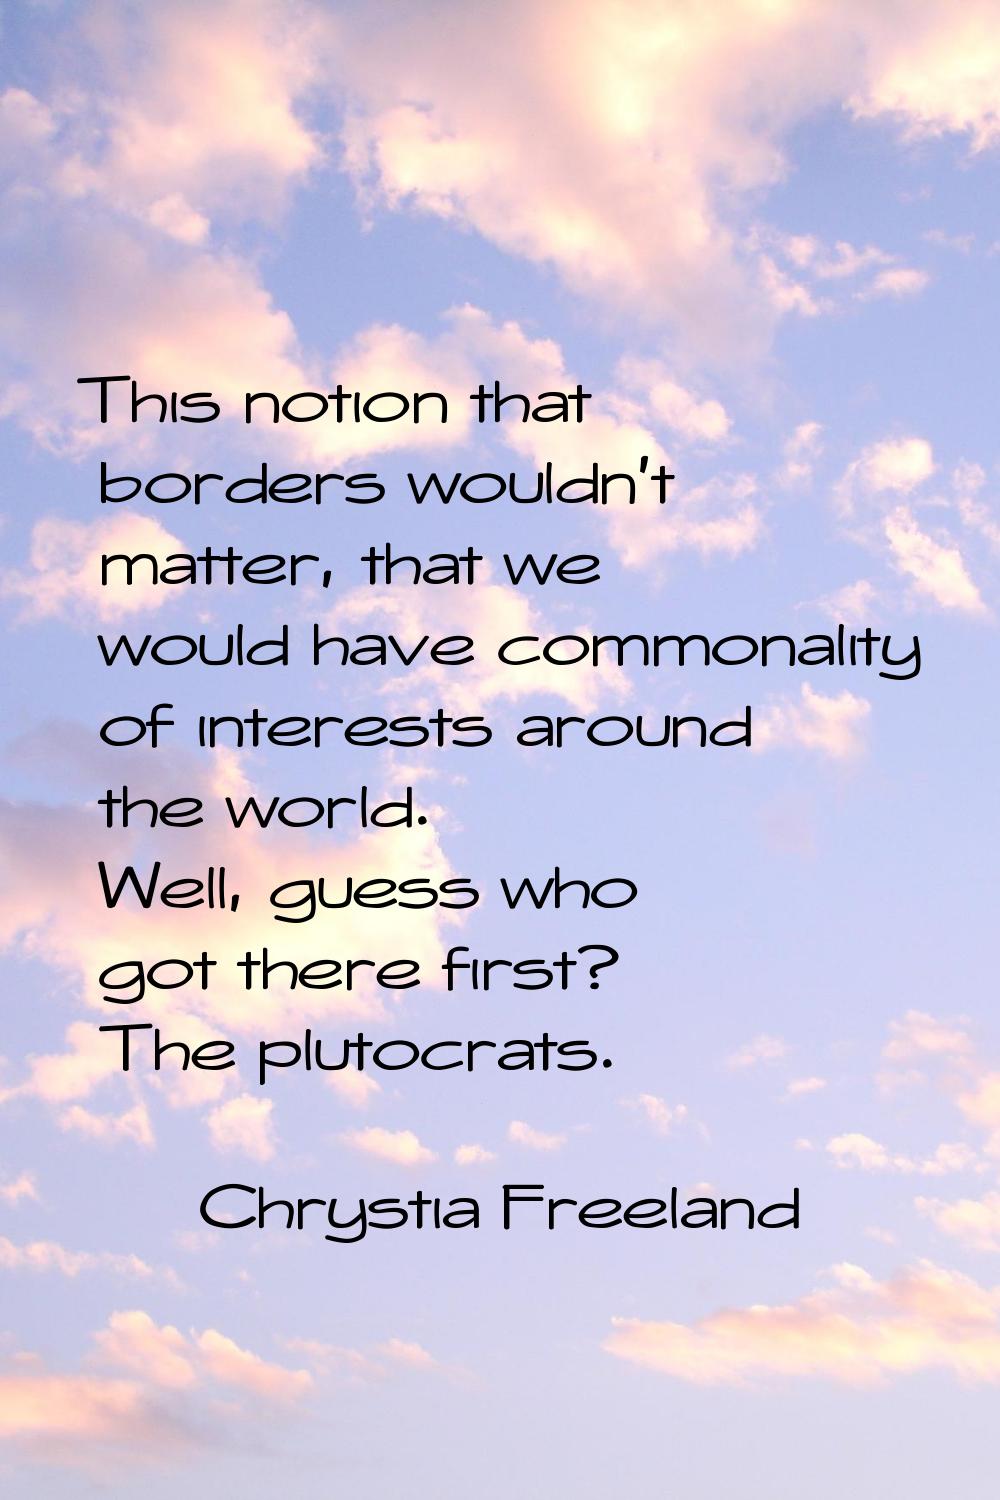 This notion that borders wouldn't matter, that we would have commonality of interests around the wo